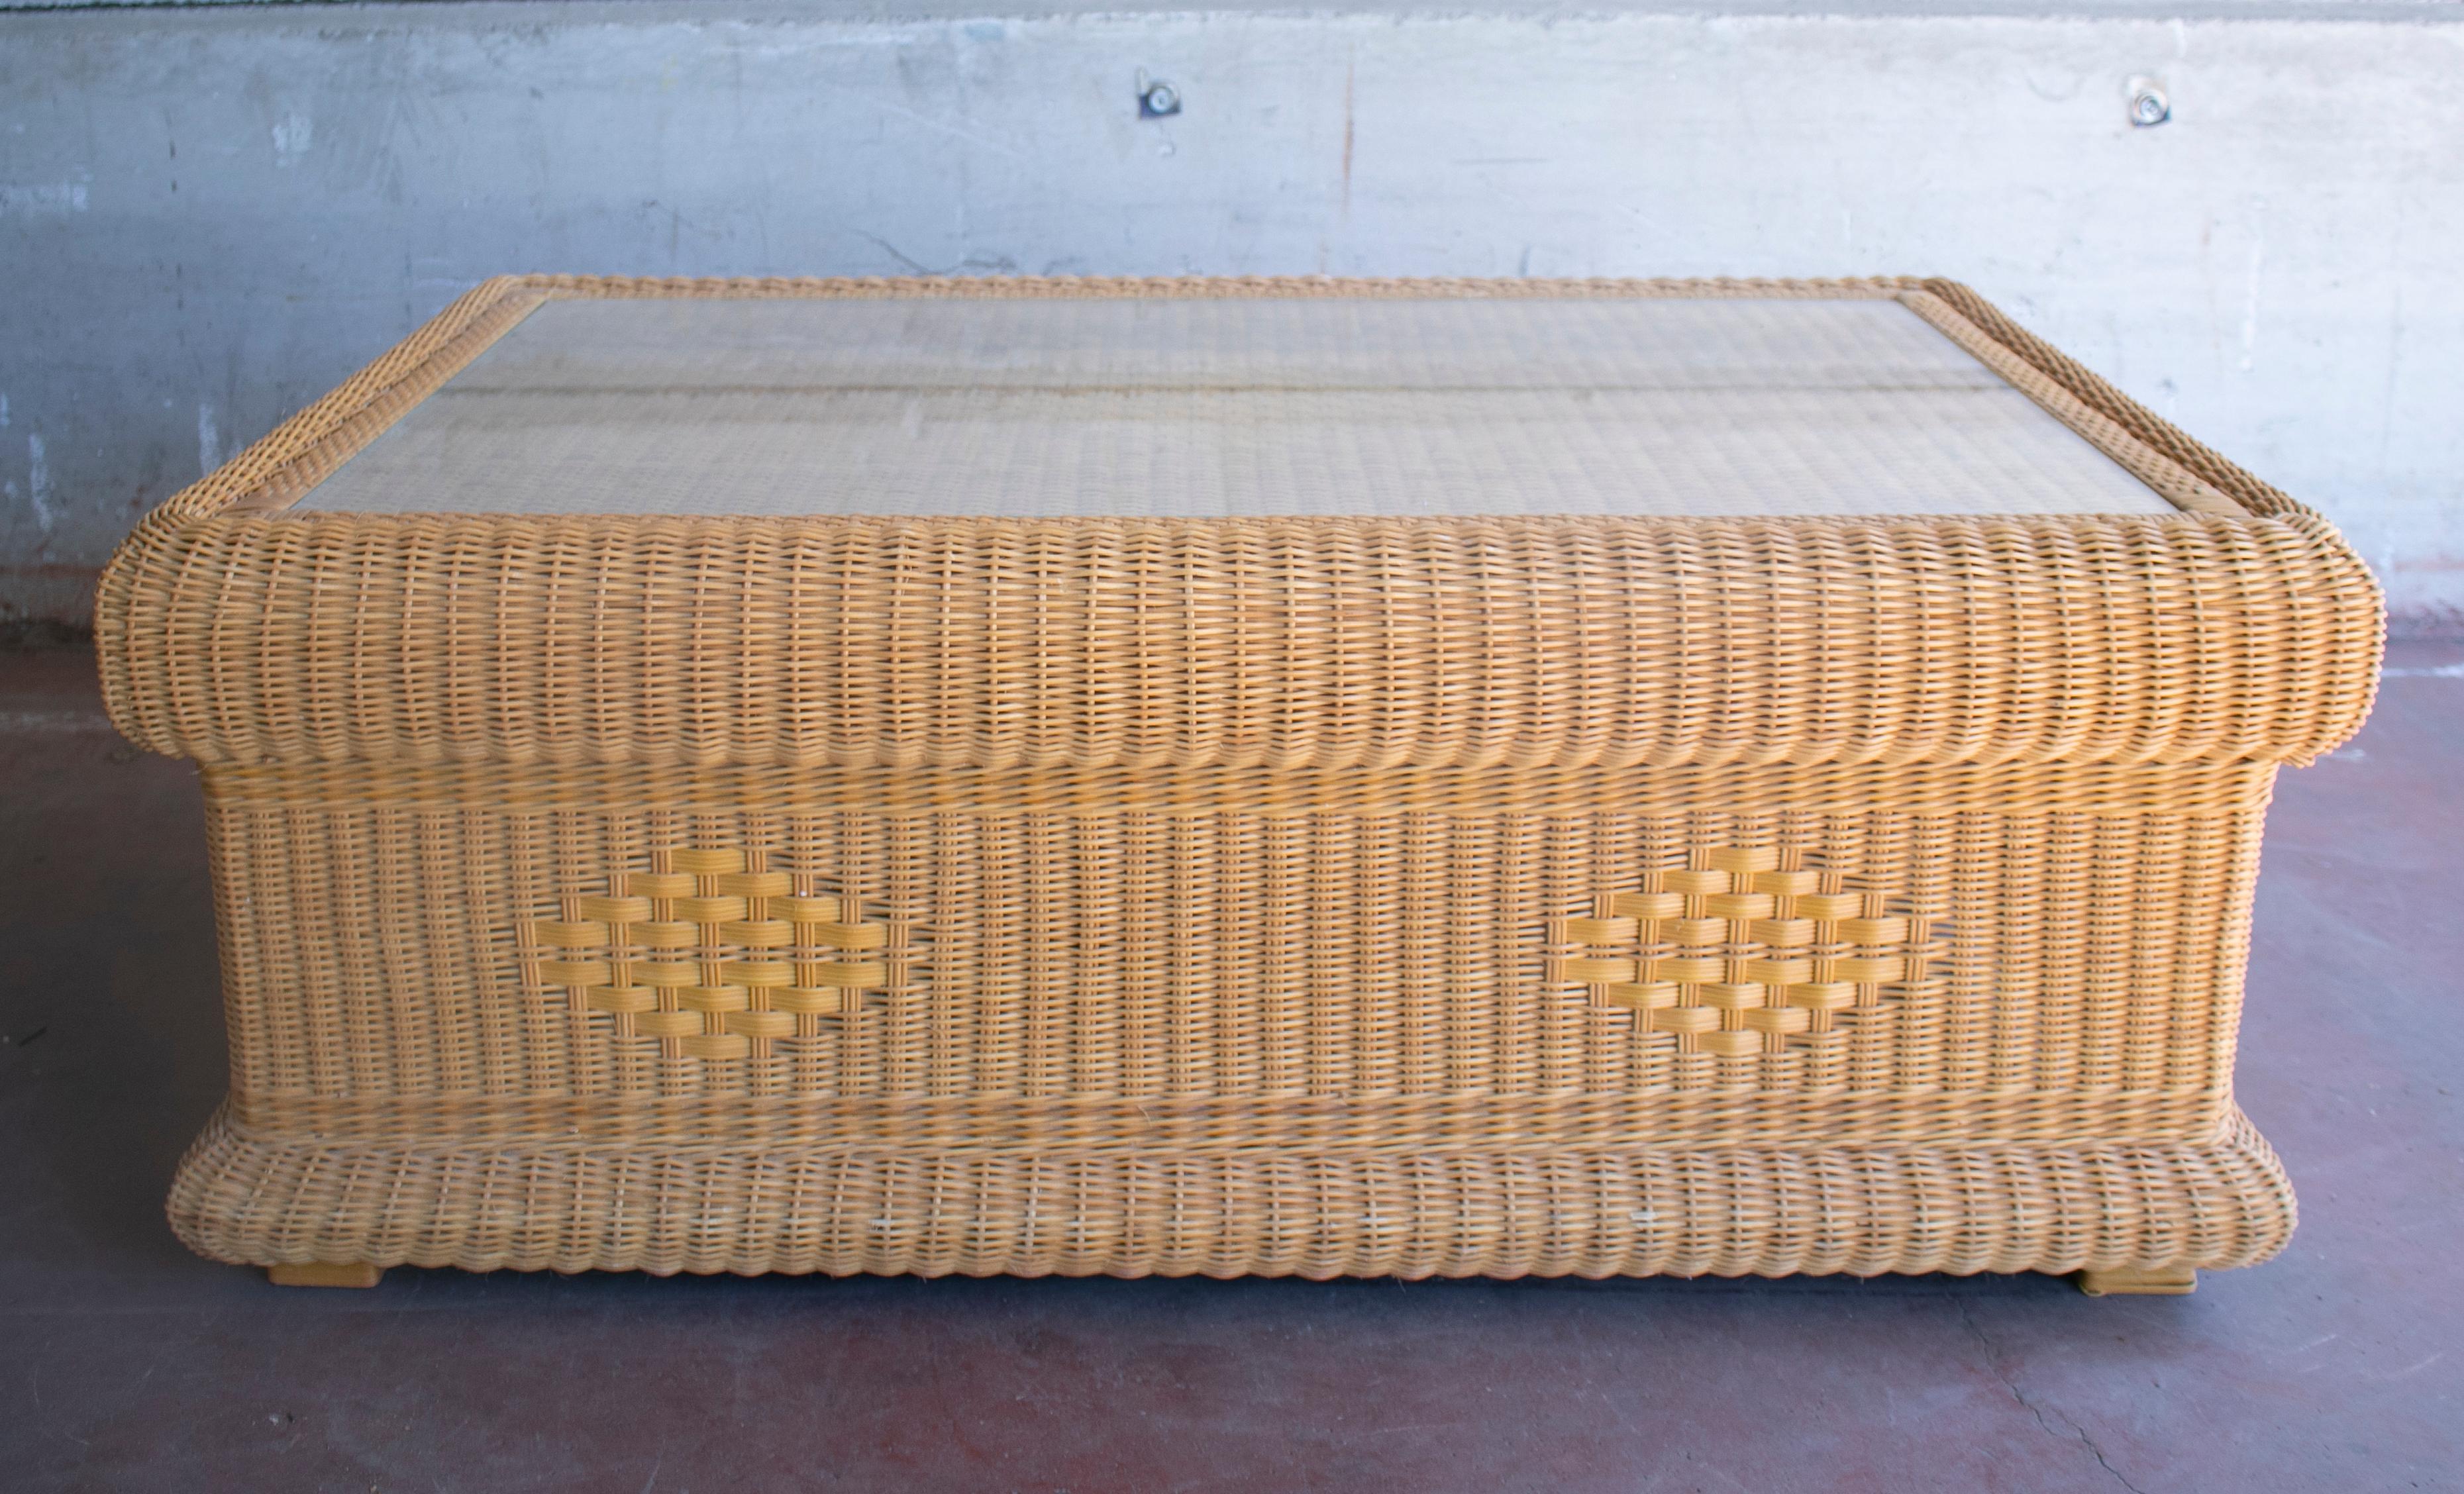 1980s Spanish hand woven wicker coffee table with glass top.